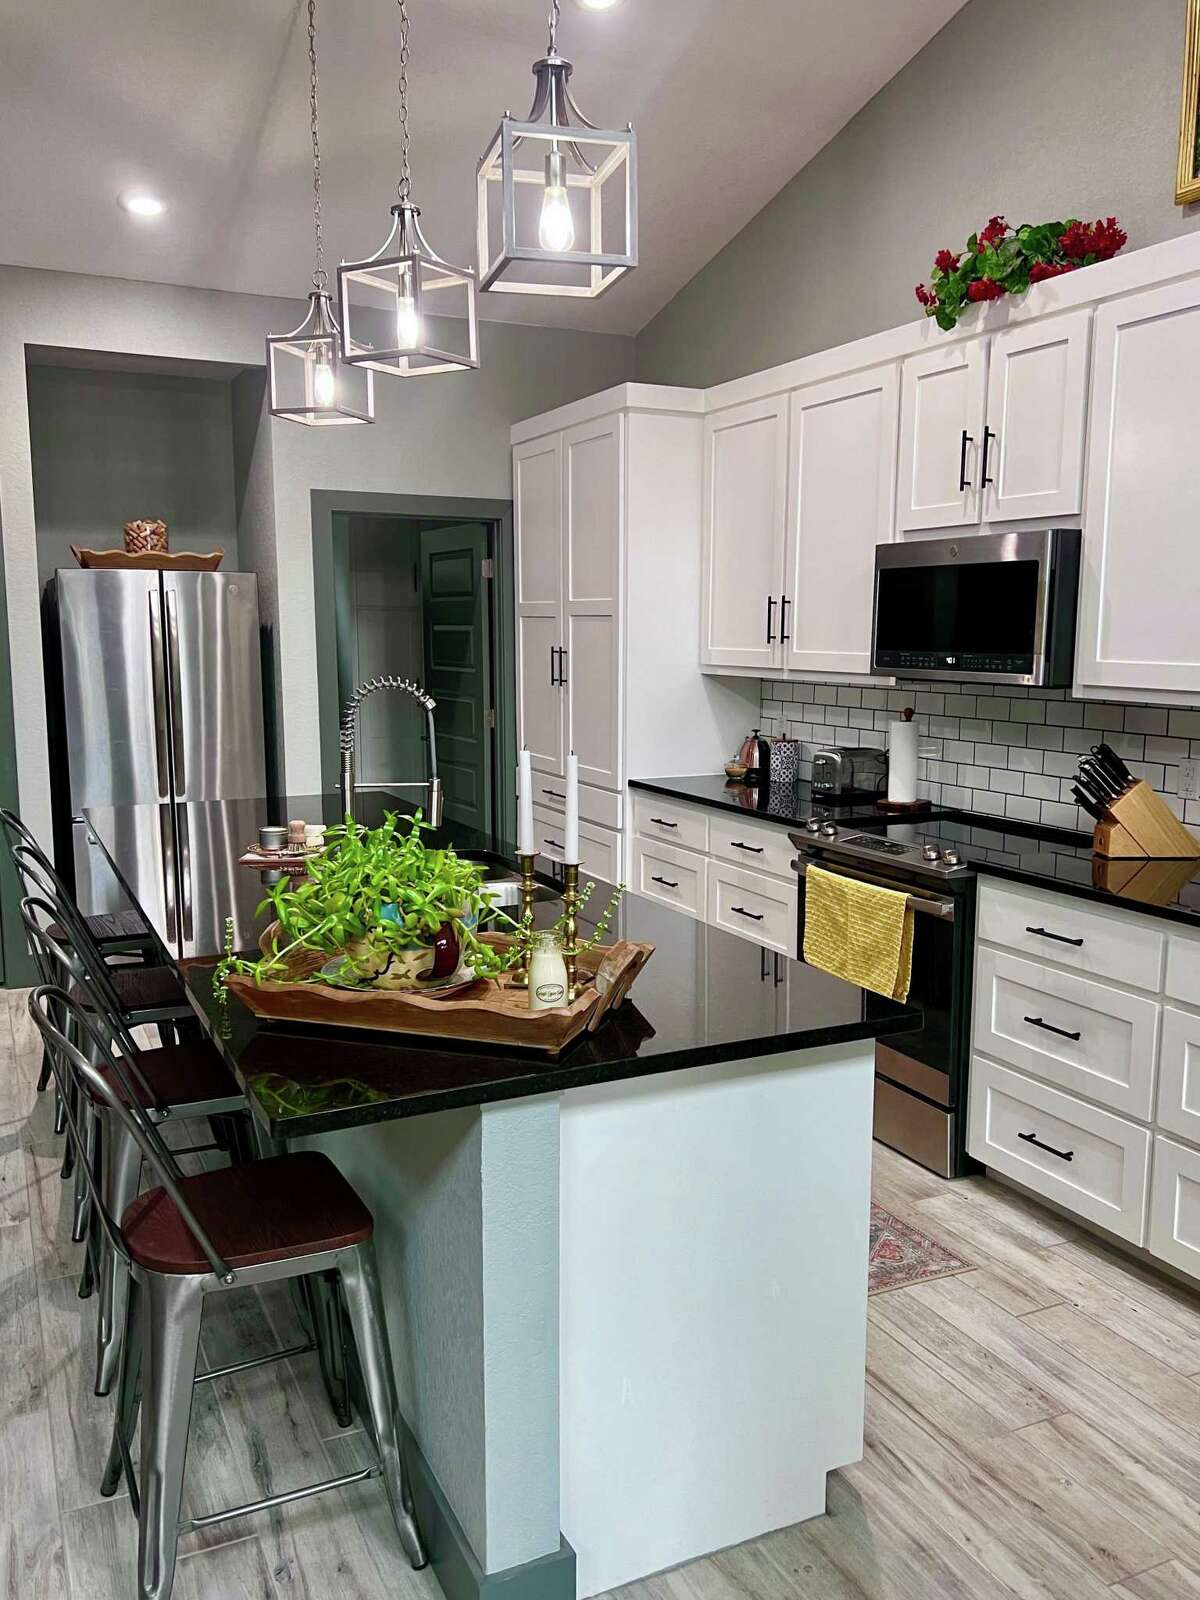 The home's contemporary design touches include the ceramic tile flooring that looks like wood planks, white subway tile in the kitchen and black granite countertops throughout.